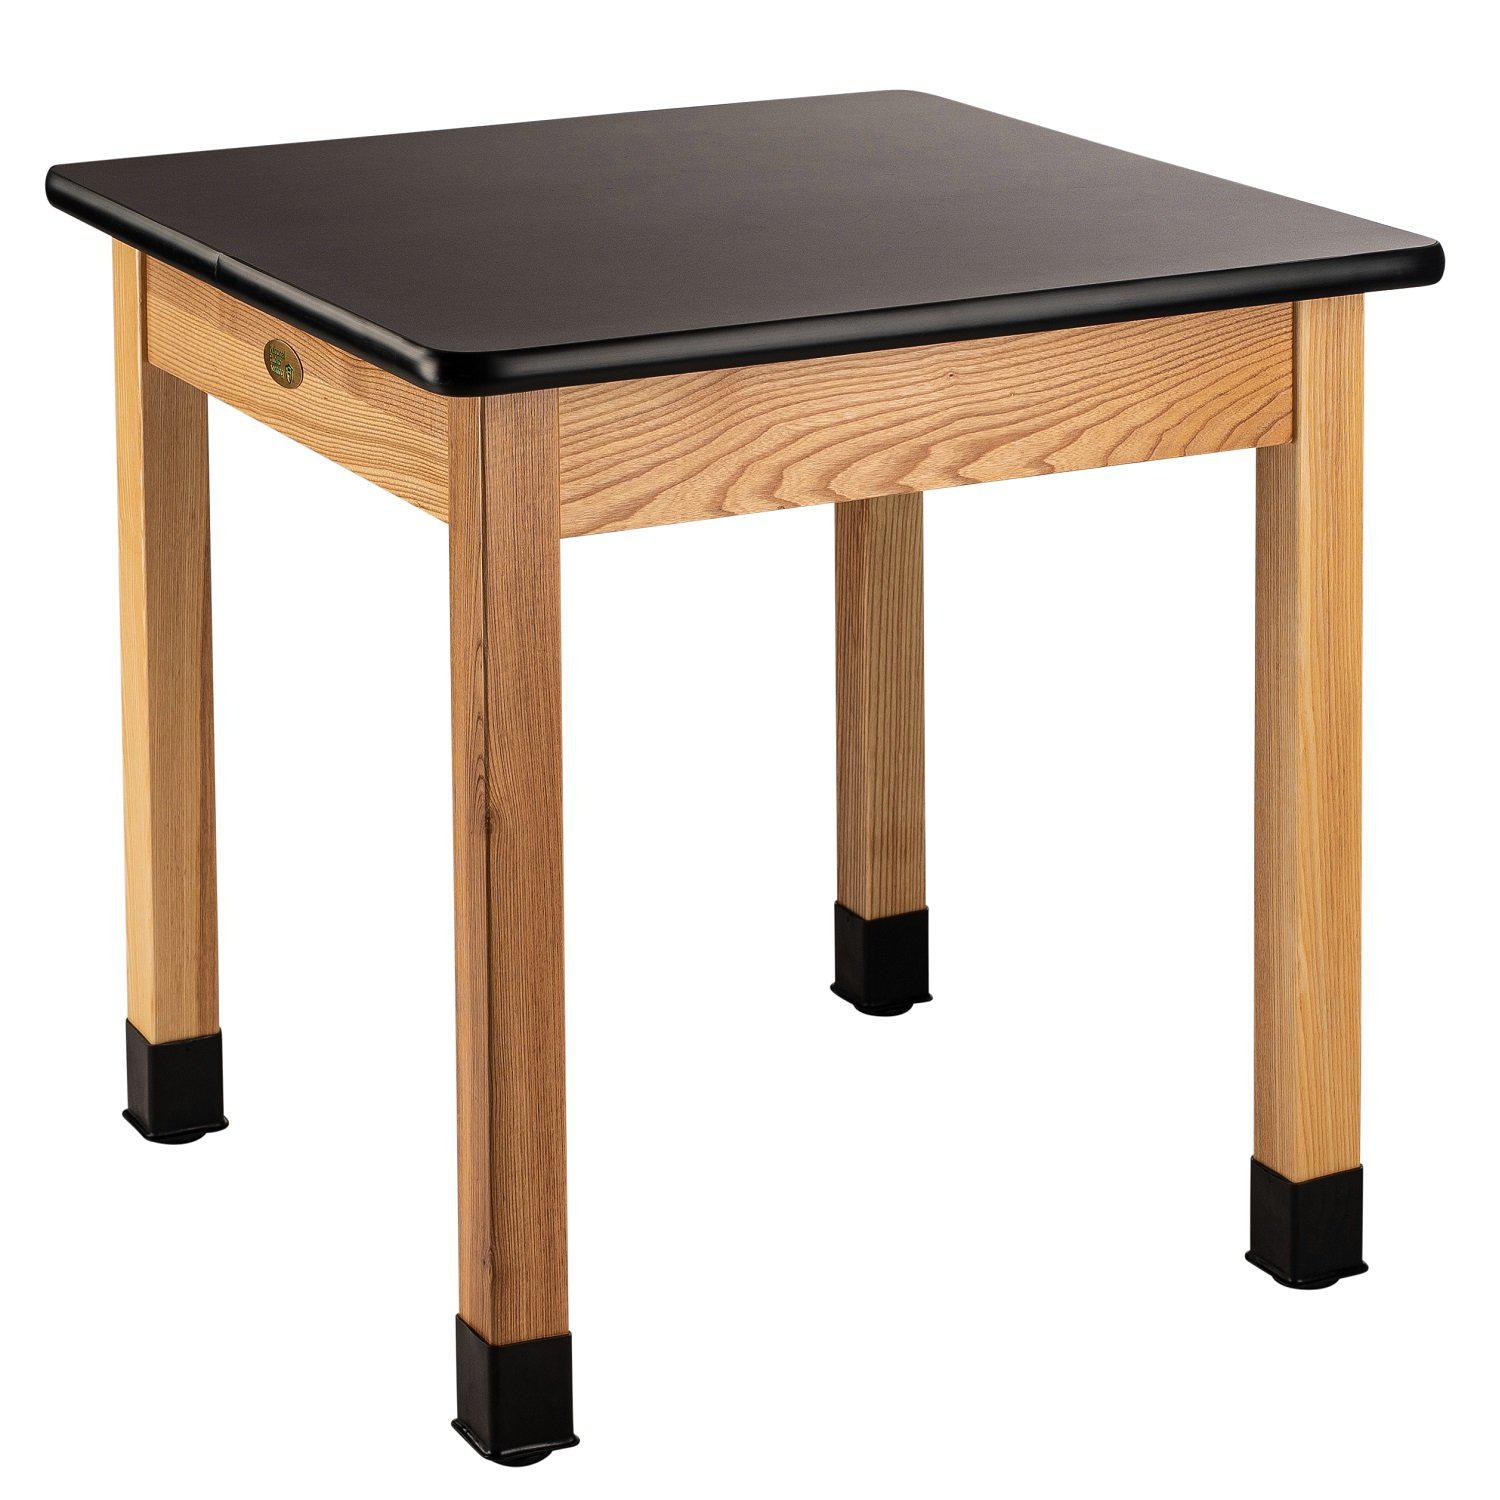 Personal Science Lab Table, Wood Frame, 30"x30"x30 H", Black High Pressure Laminate Top